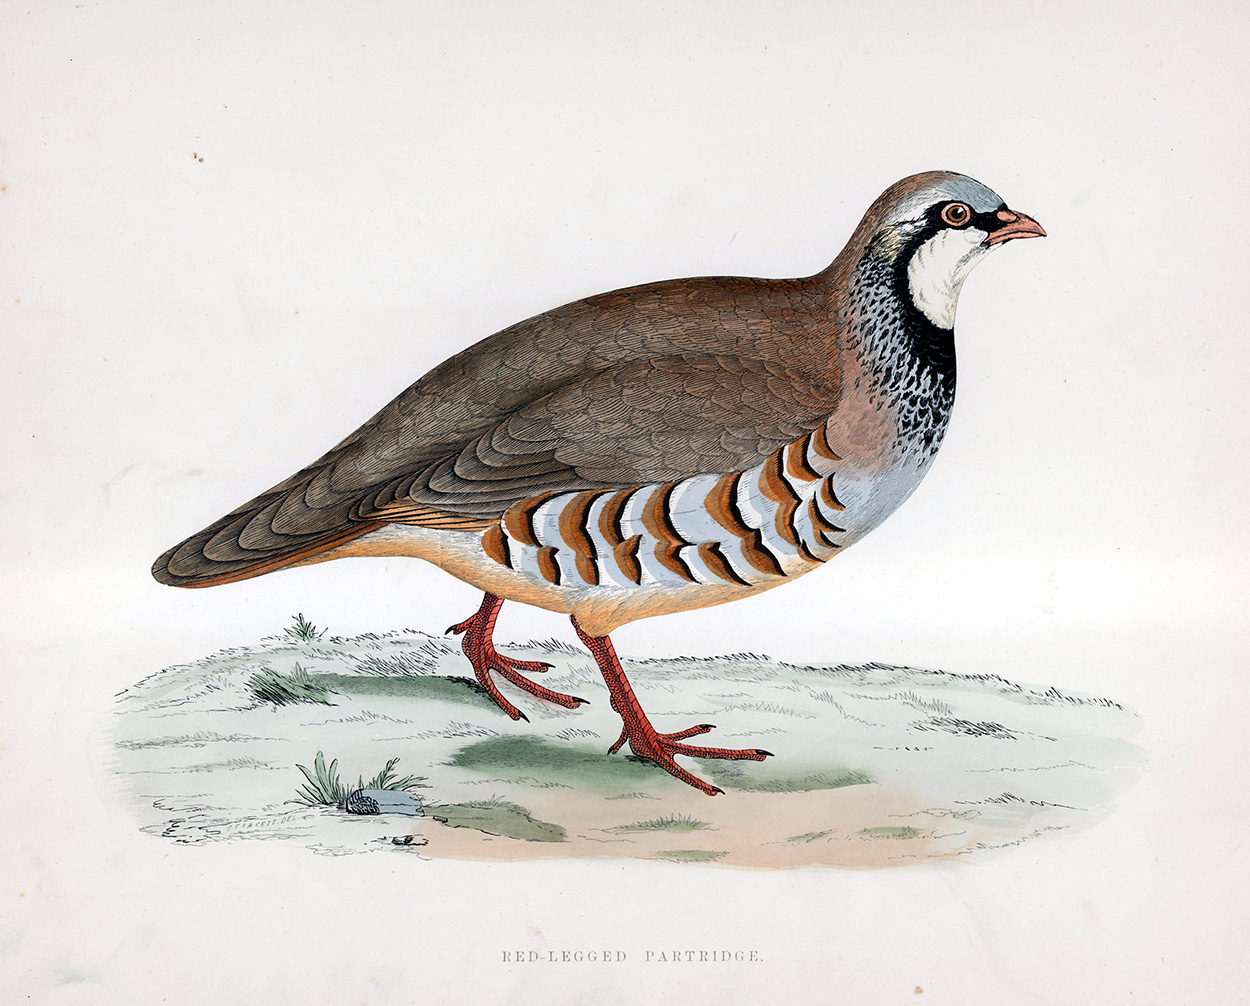 Red Legged Partridge - hand coloured lithograph 1891 (Print) art by Beverley R Morris Art at The Illustration Art Gallery